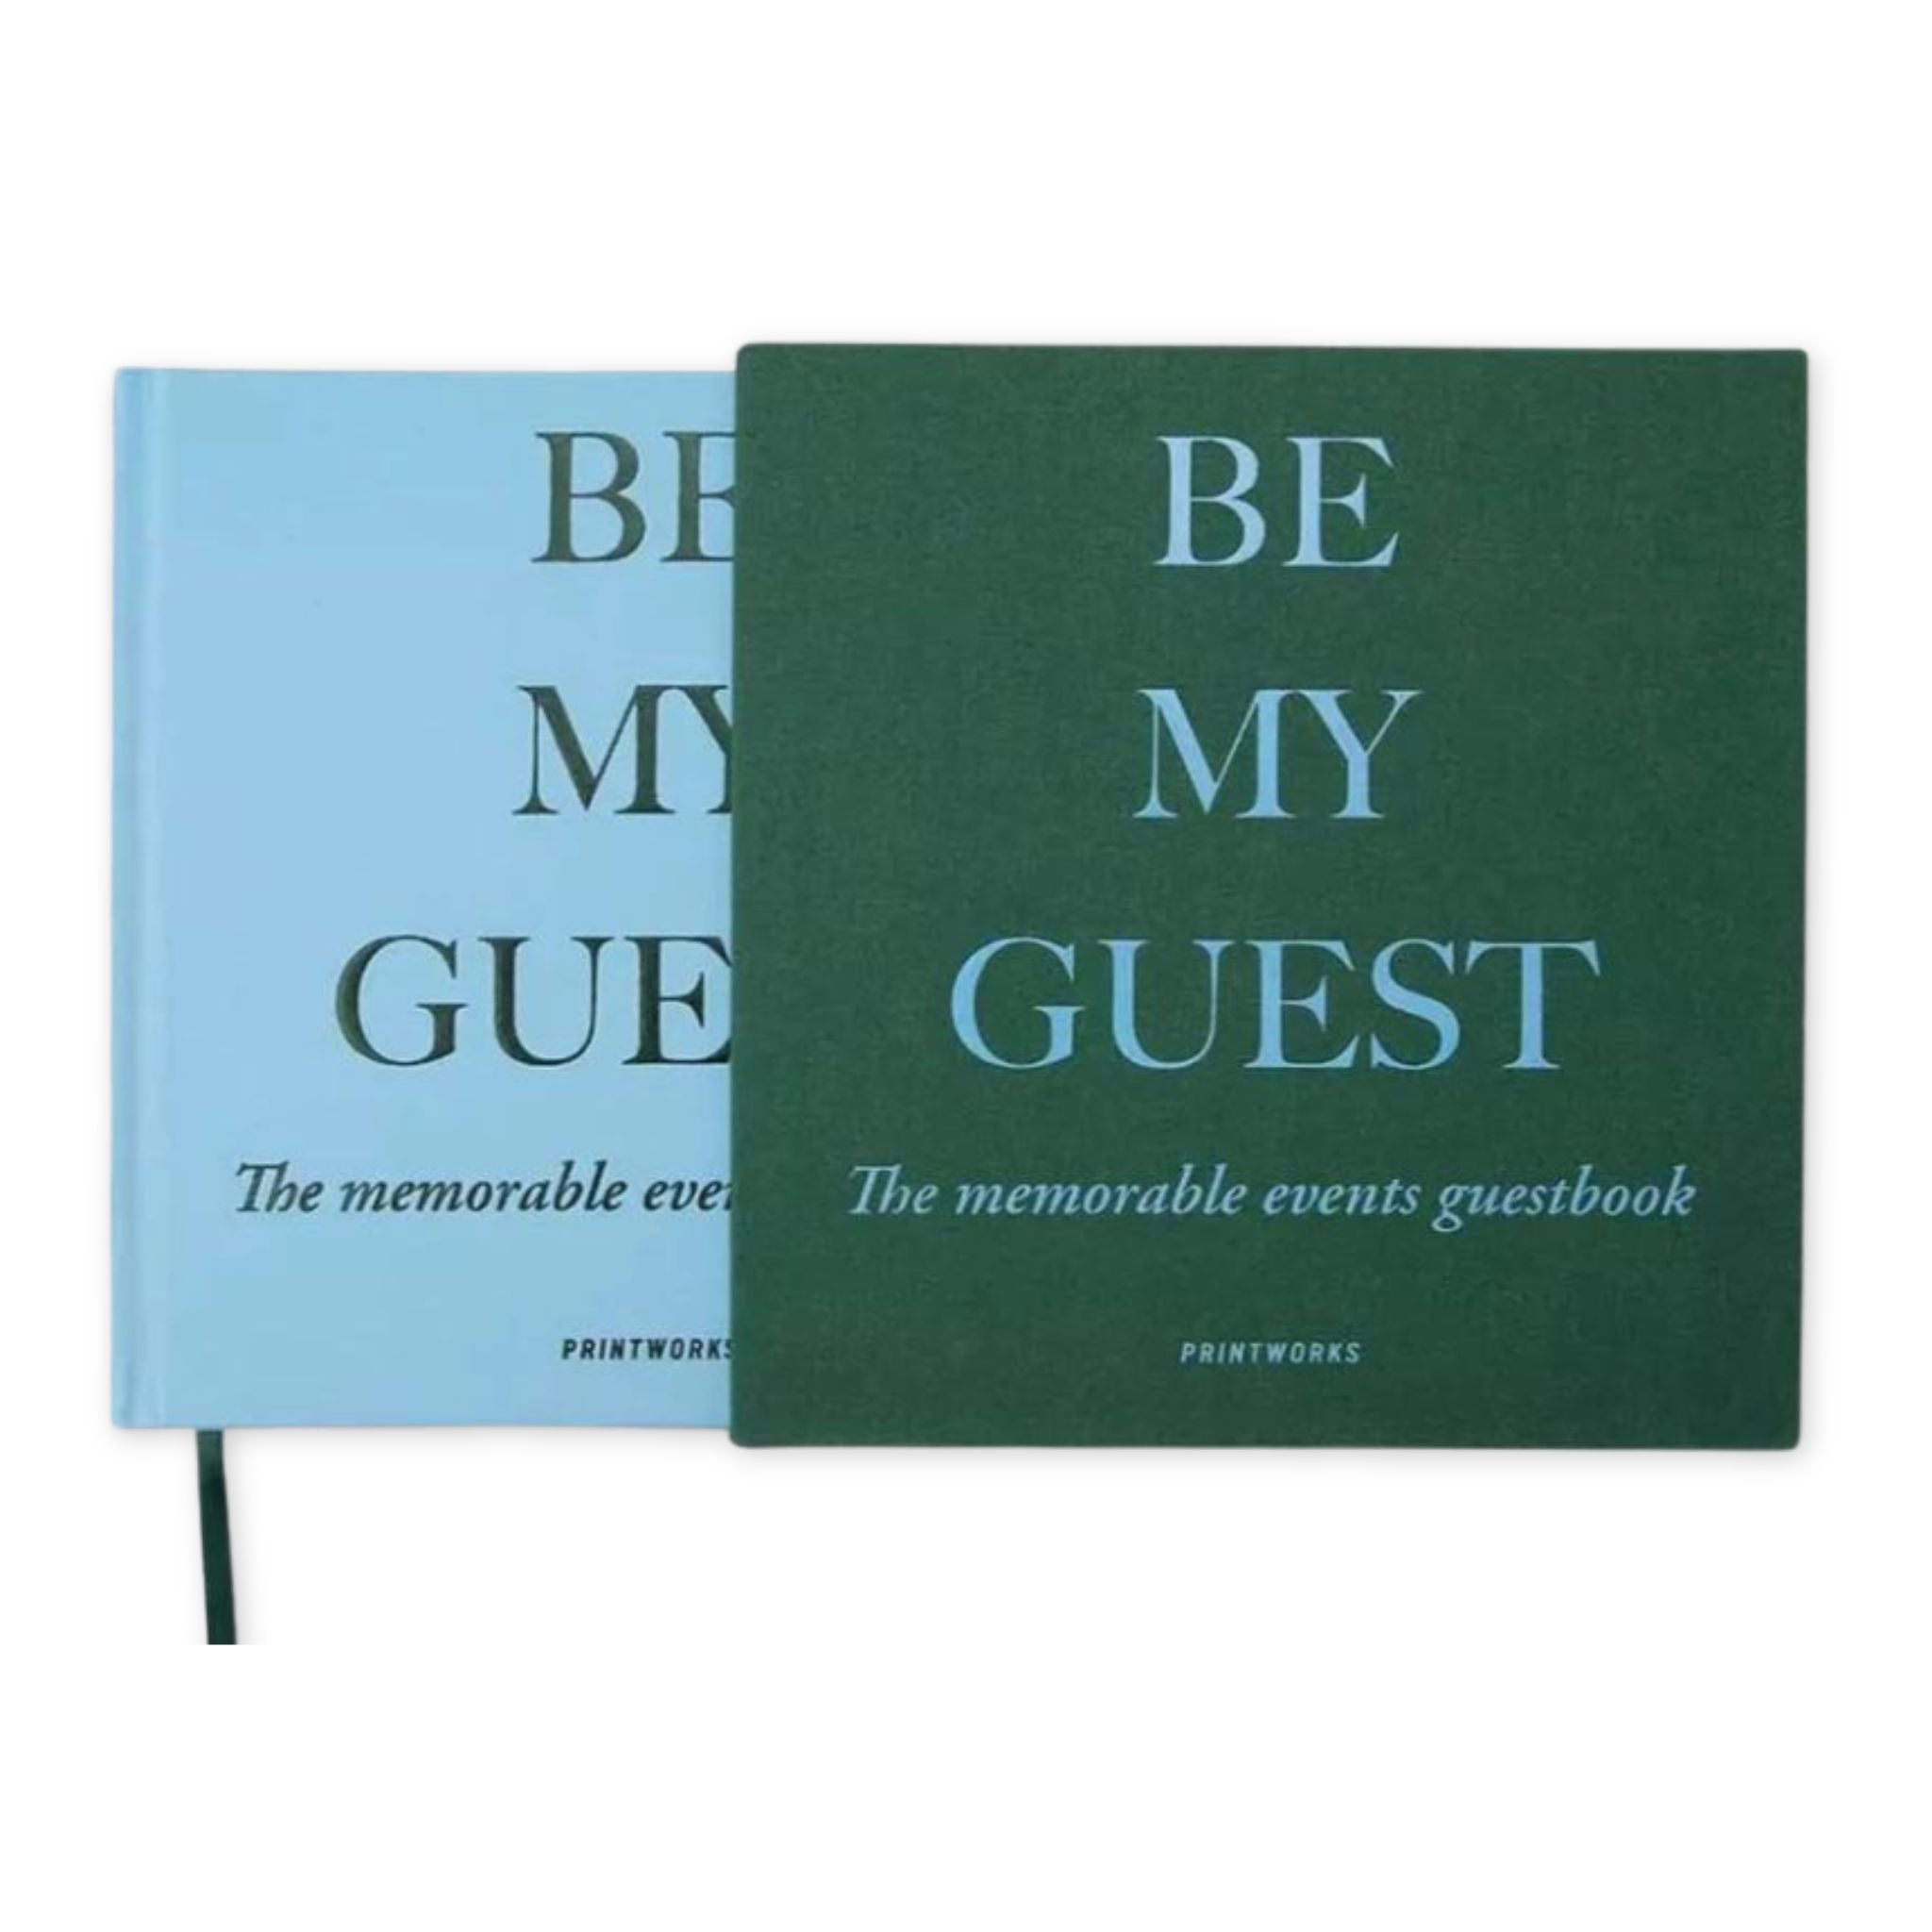 Be My Guest, Guest Book in Green and Blue Colors